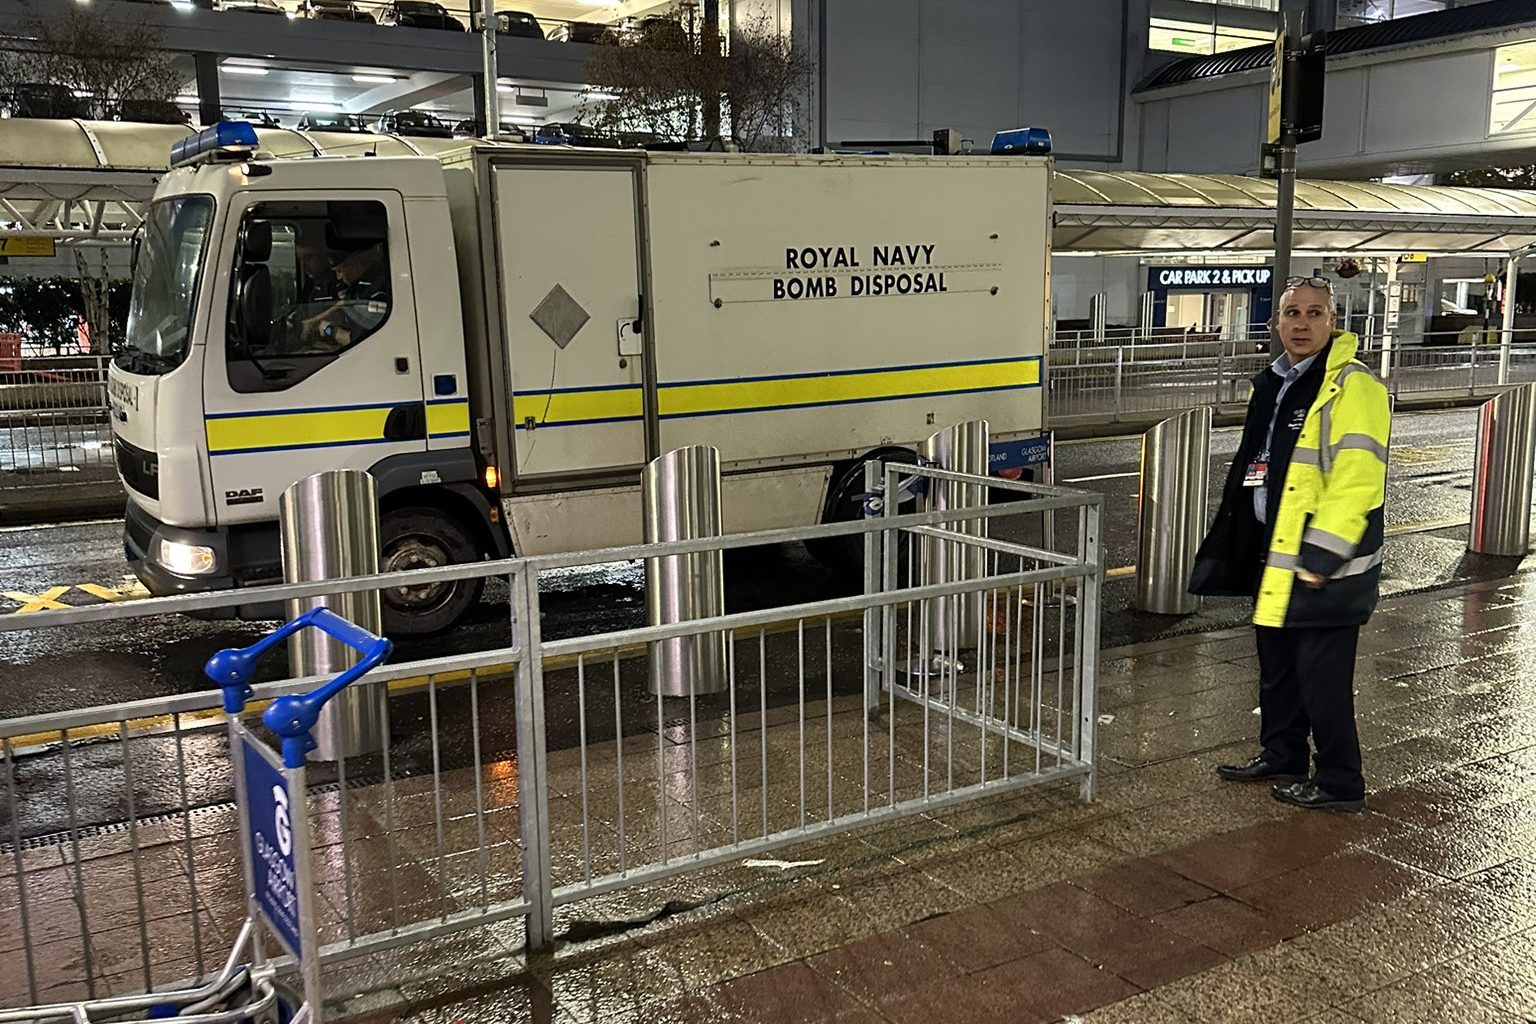 A Royal Navy Bomb Disposal unit was also pictured at the scene. 